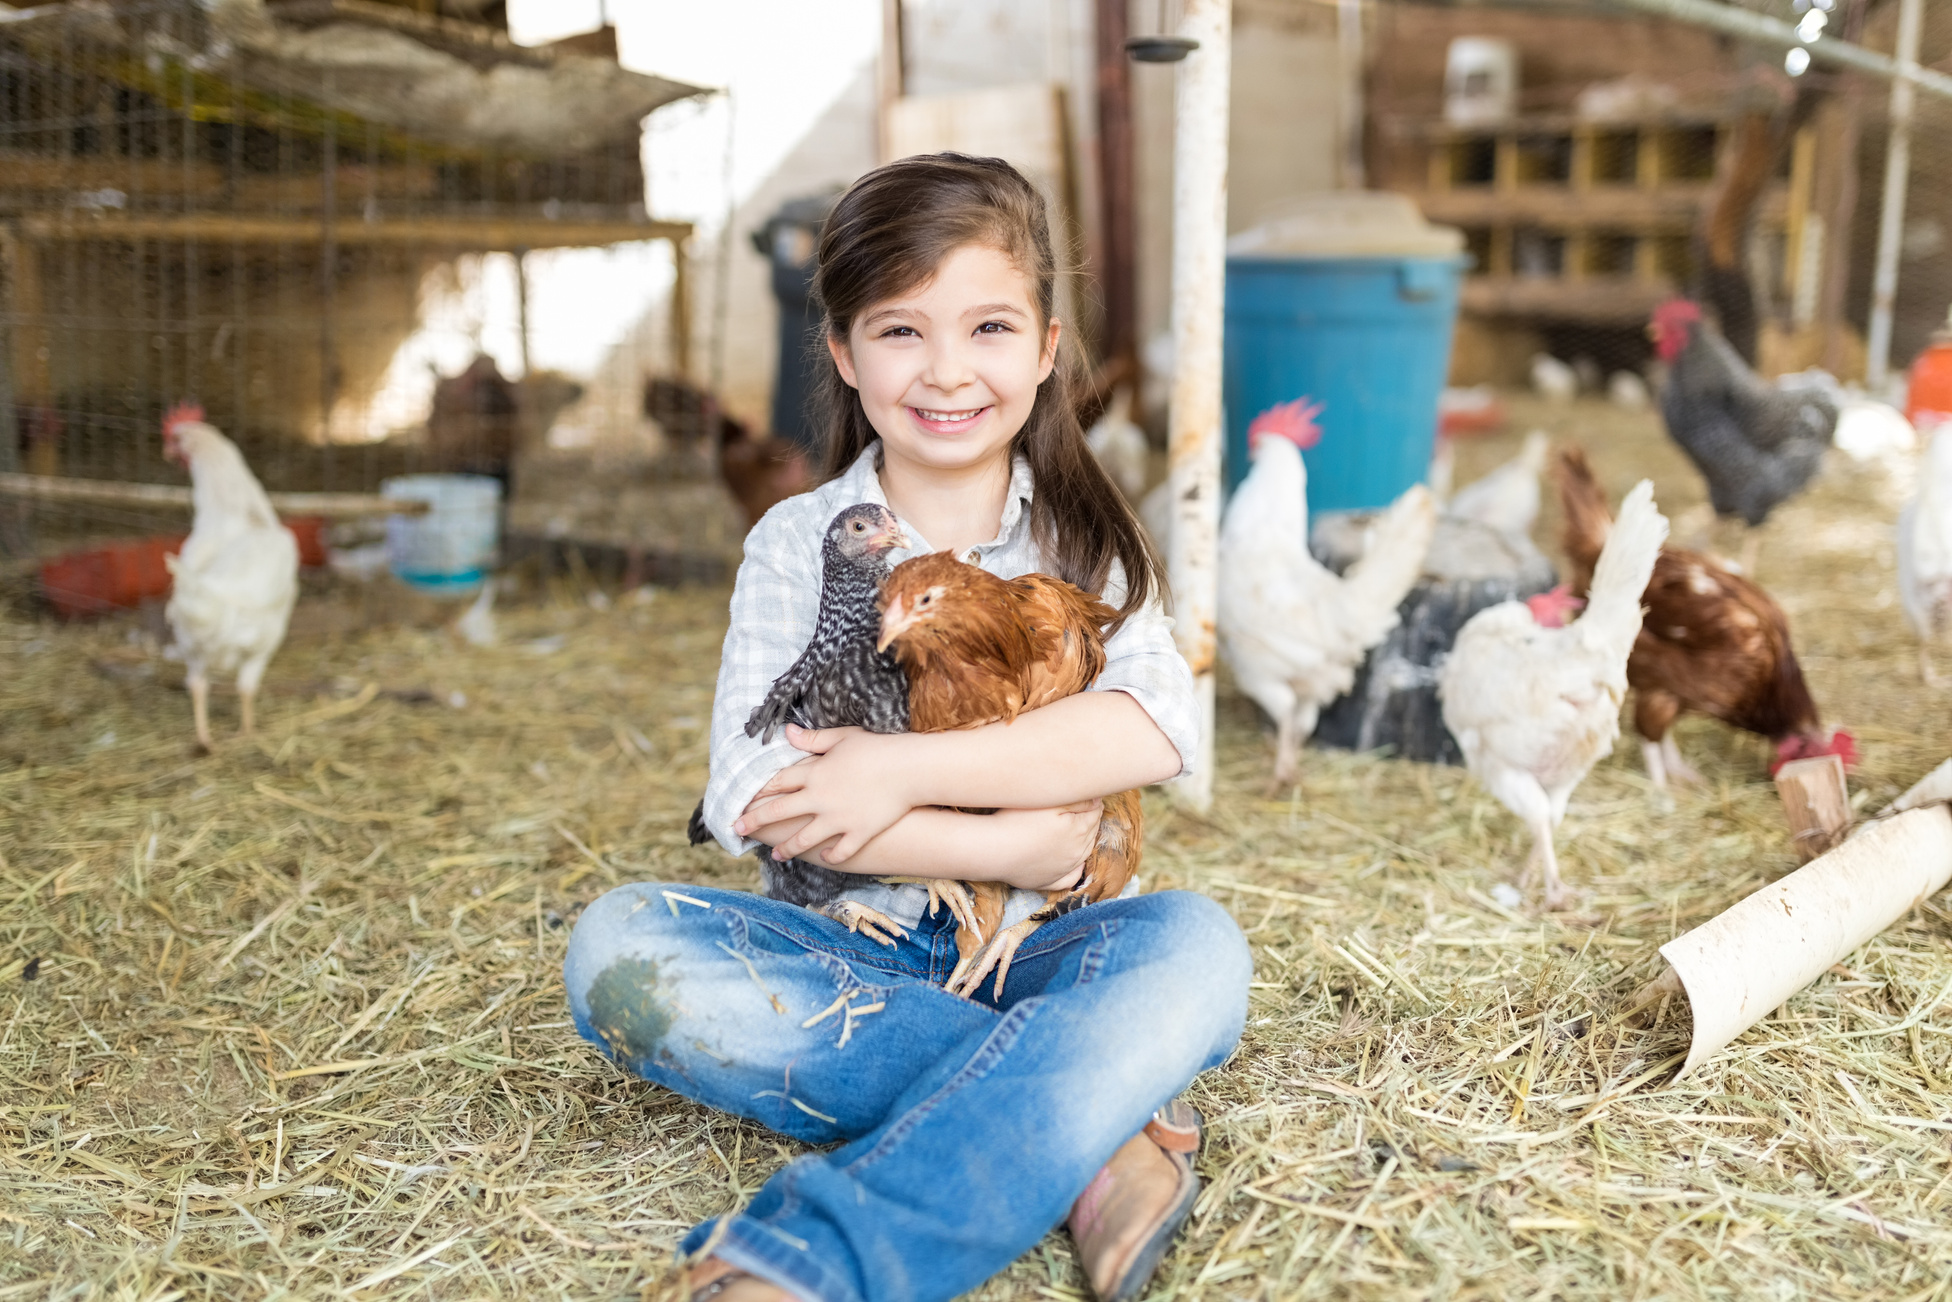 Cute Female Child Embracing Chickens At Farm